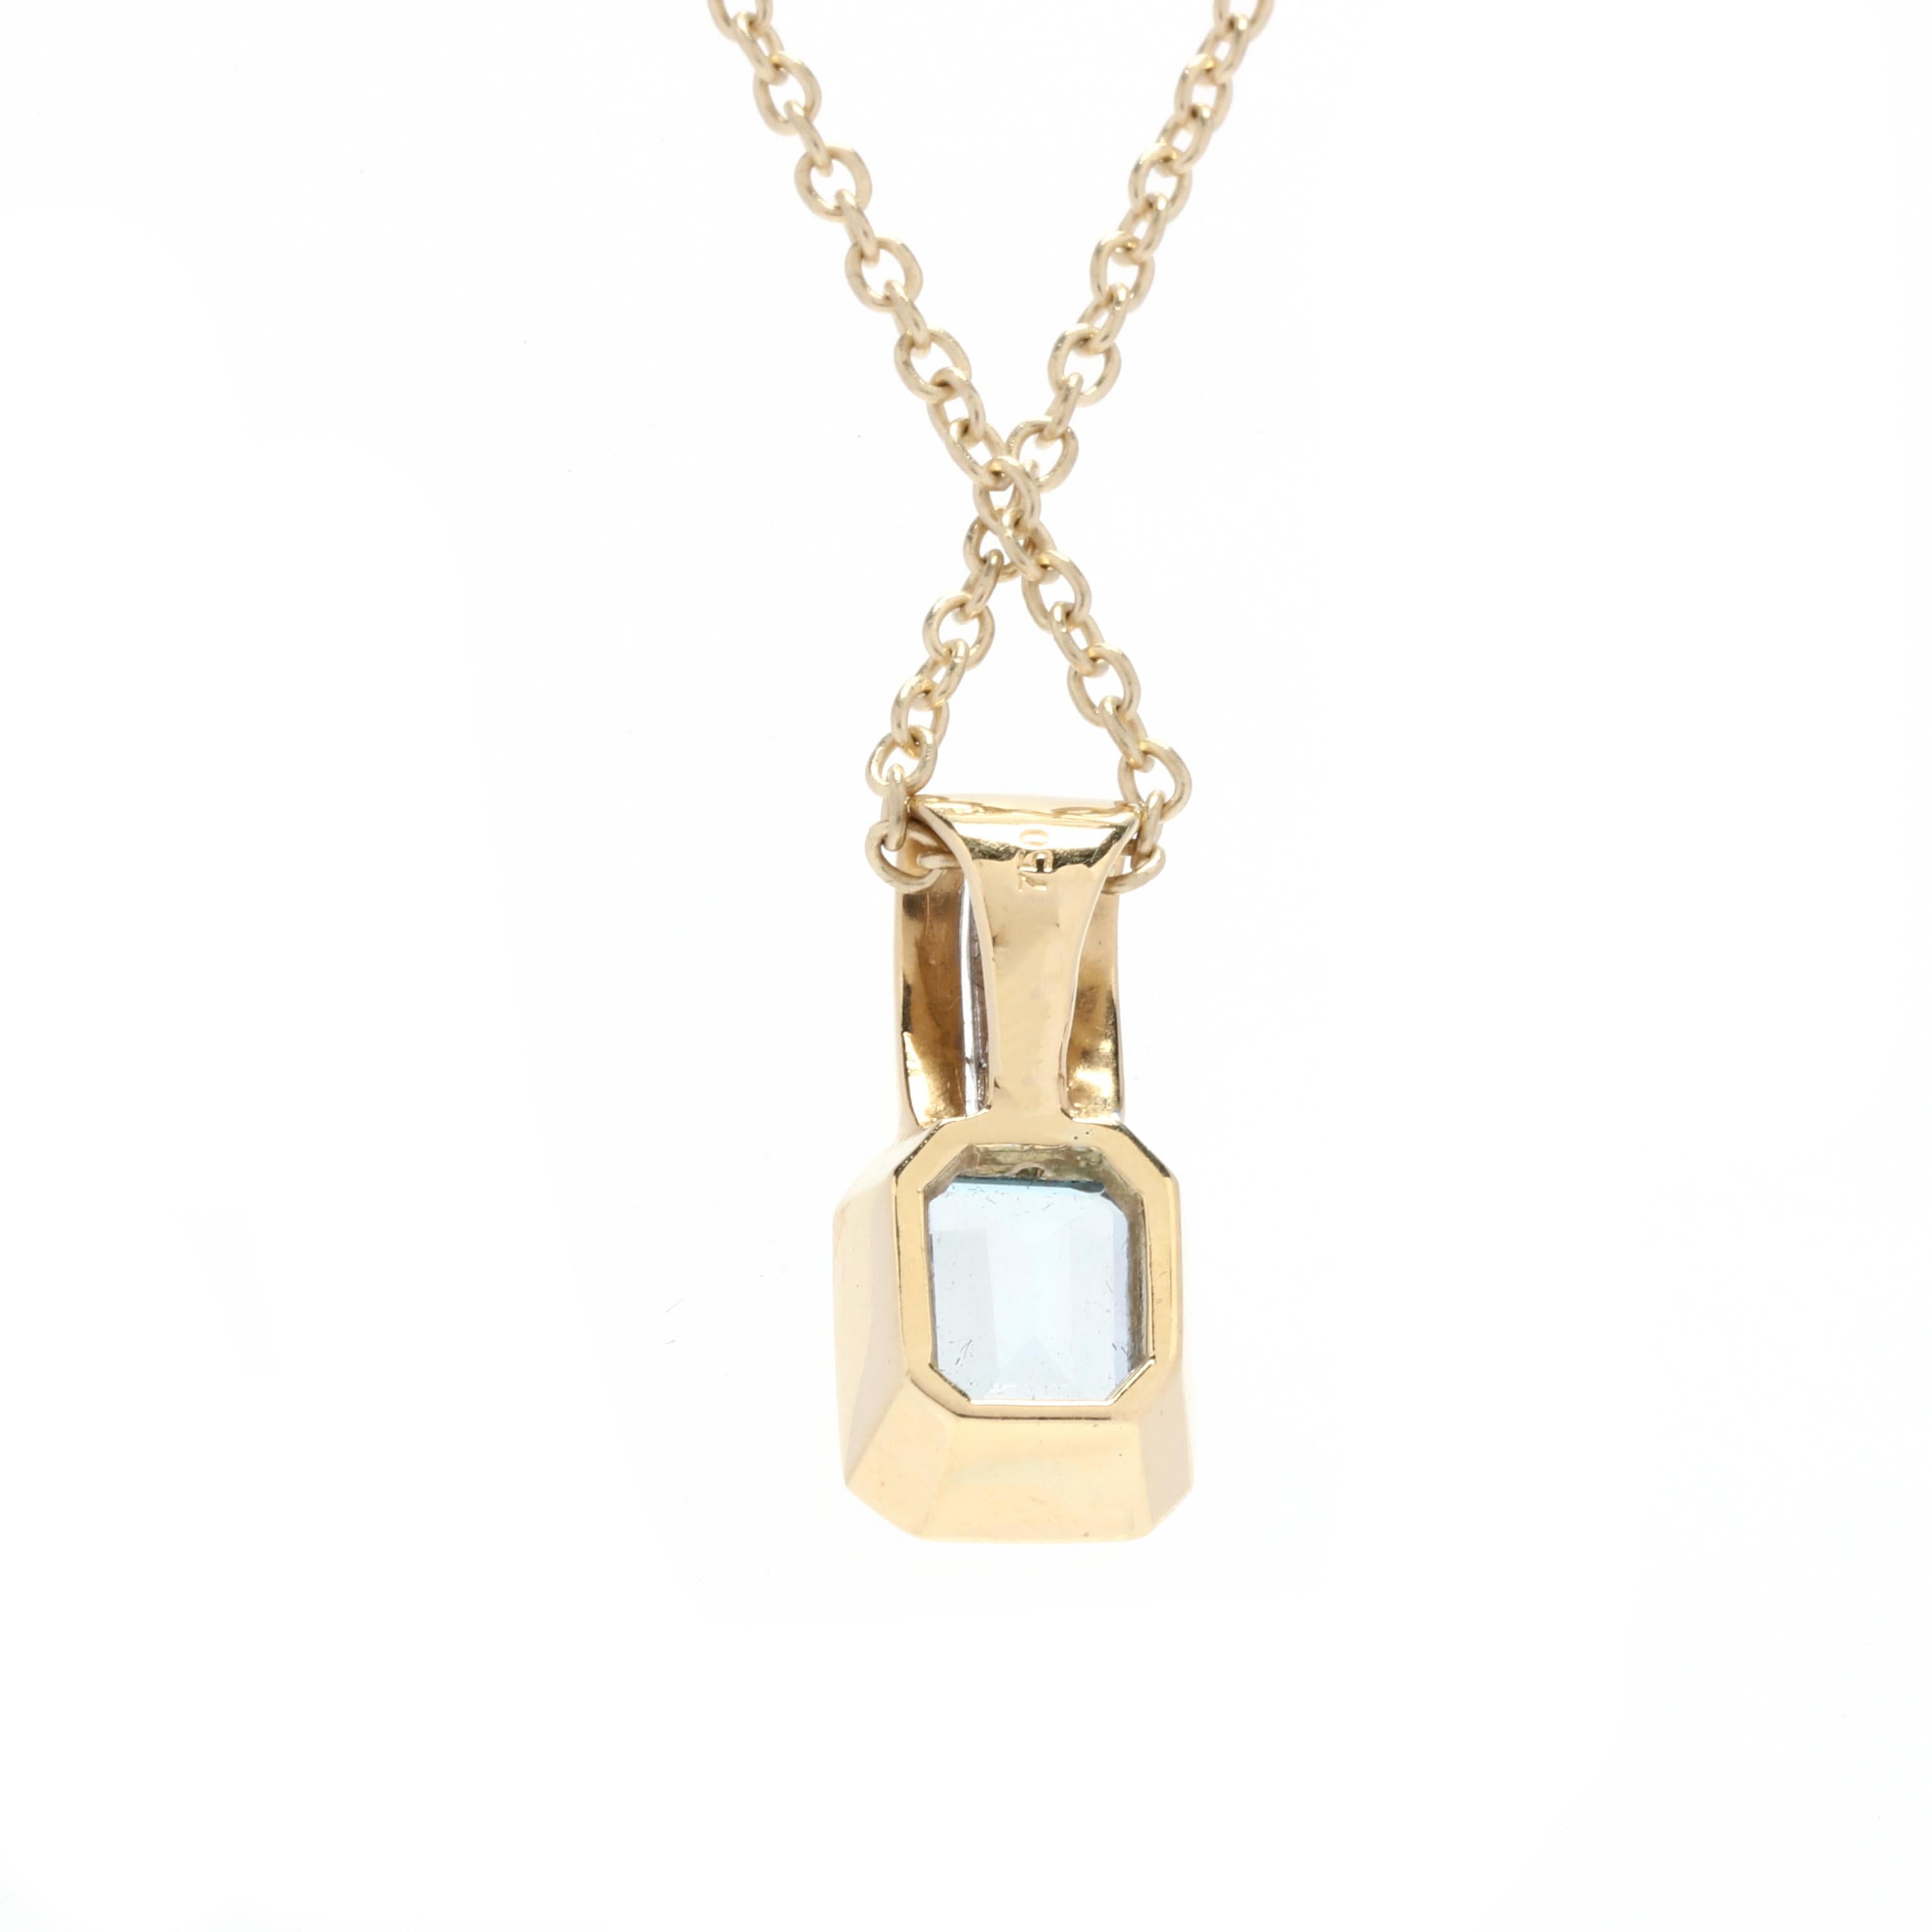 An 18 karat and 14 karat bi-color gold blue topaz and diamond pendant necklace. This necklace features an 18 karat yellow gold bezel set emerald cut blue topaz weighing approximately 2 carats with a bi-color gold wide bail set with two full cut